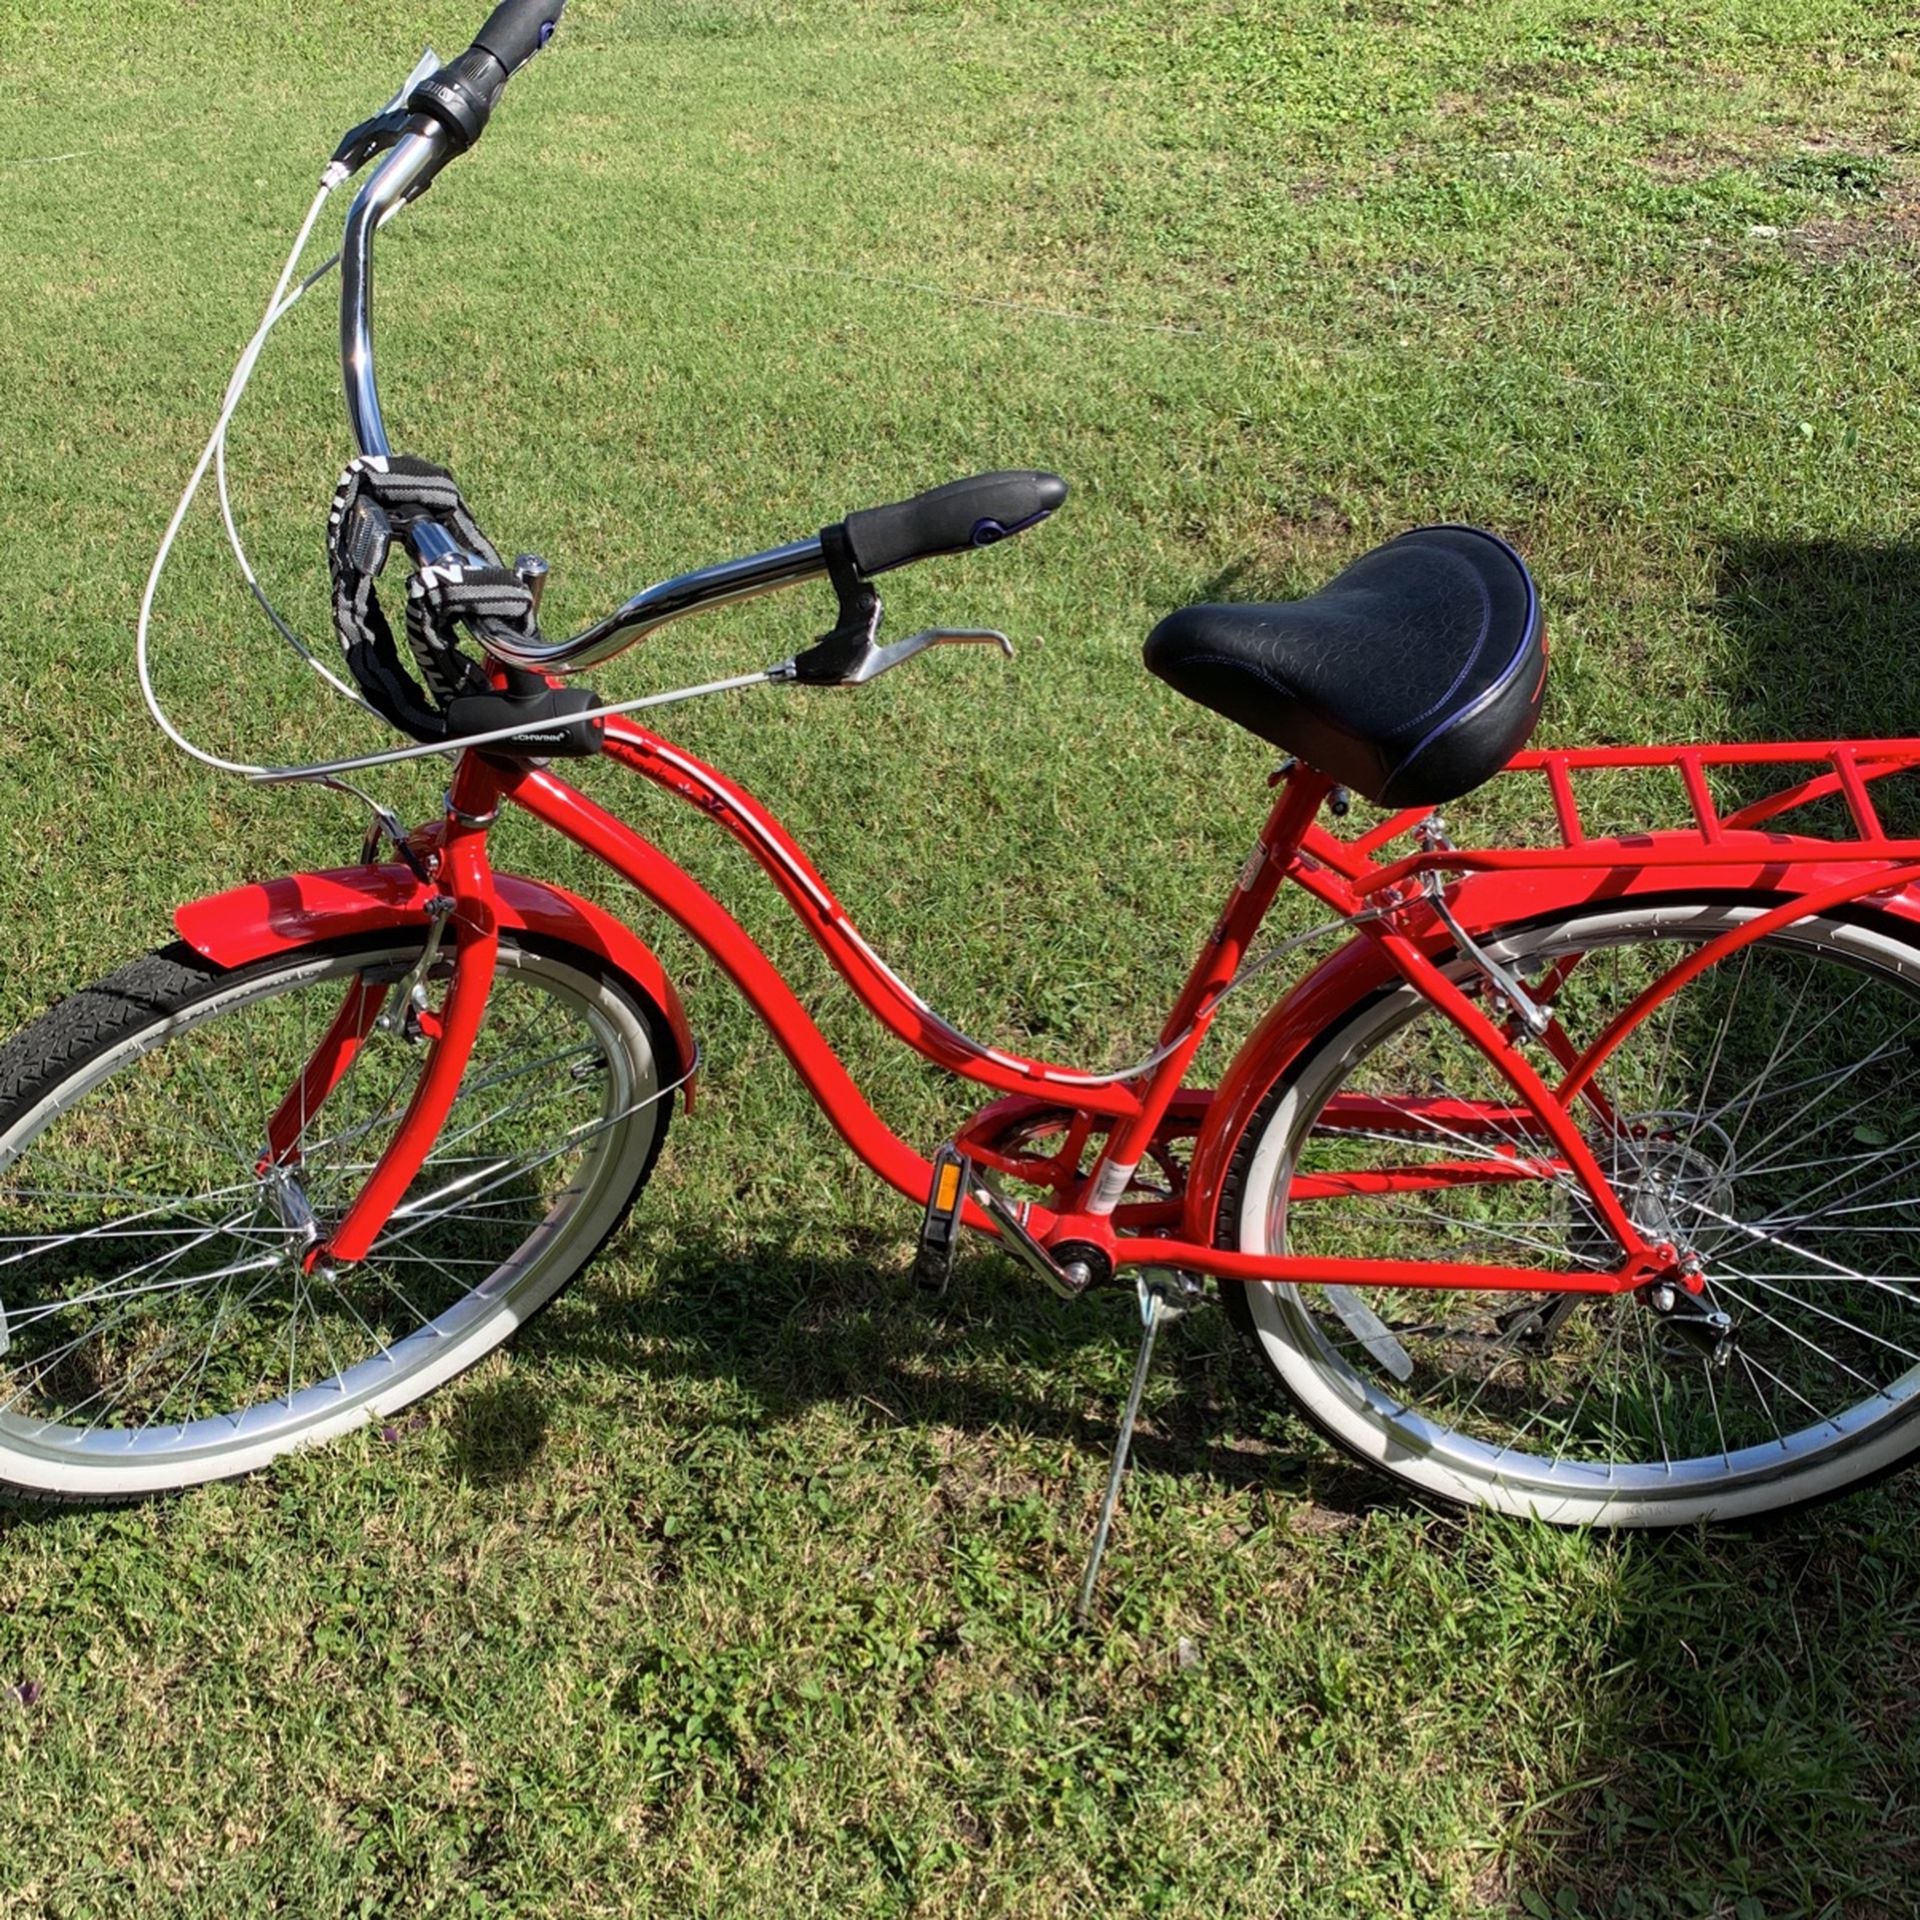 Brand New Schwinn Cruiser With Shift Gears And Chain Lock With 2 Keys